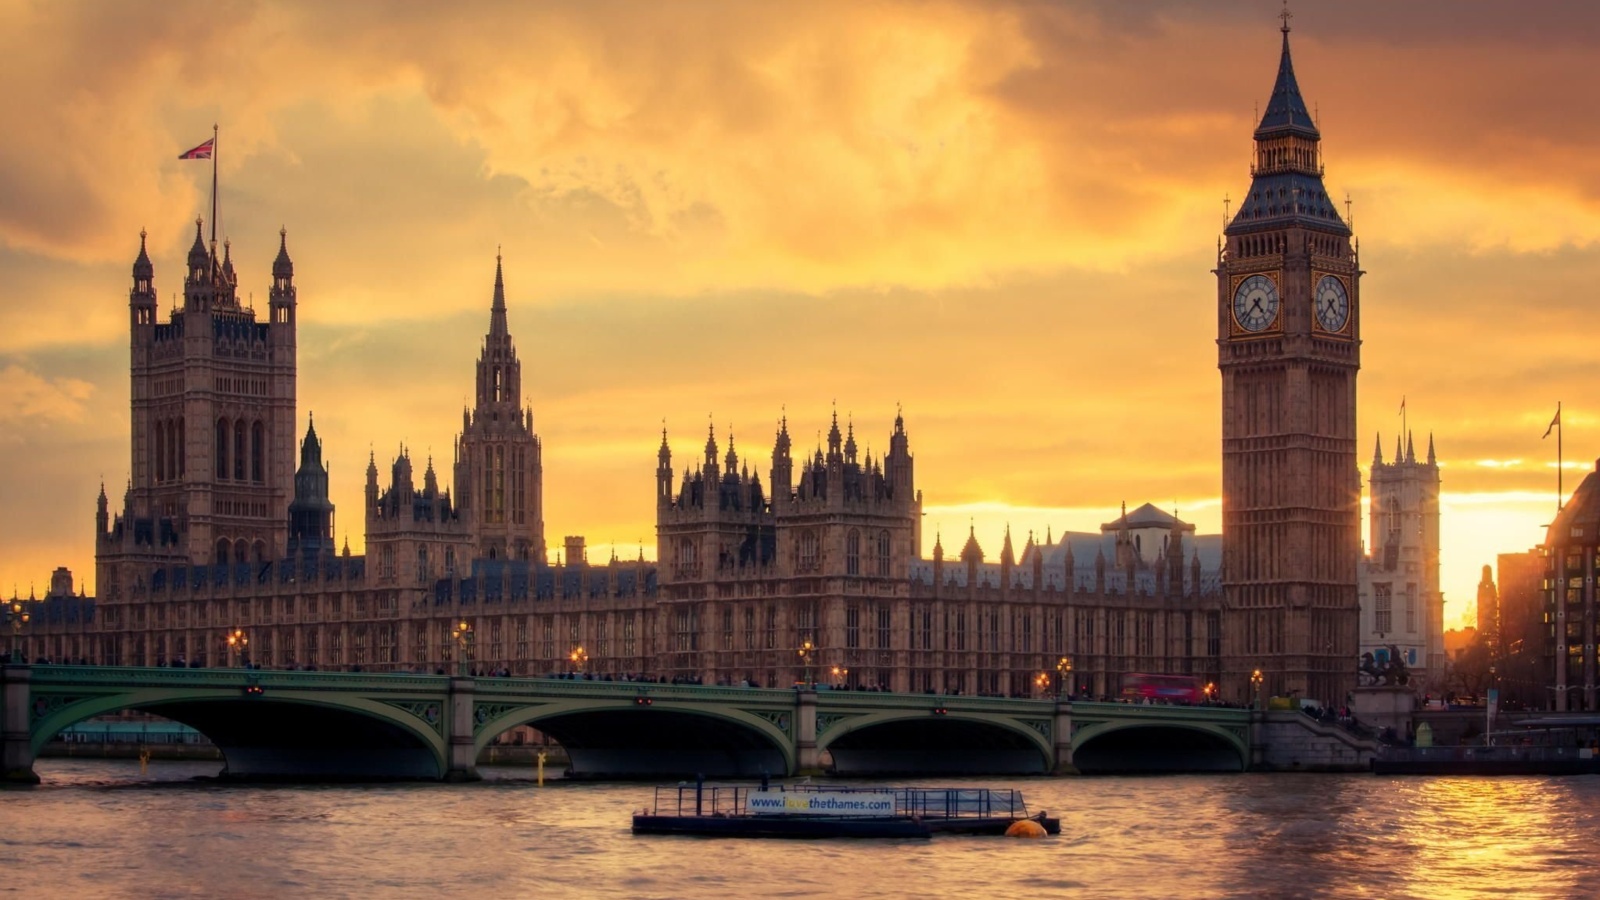 Palace of Westminster wallpaper 1600x900